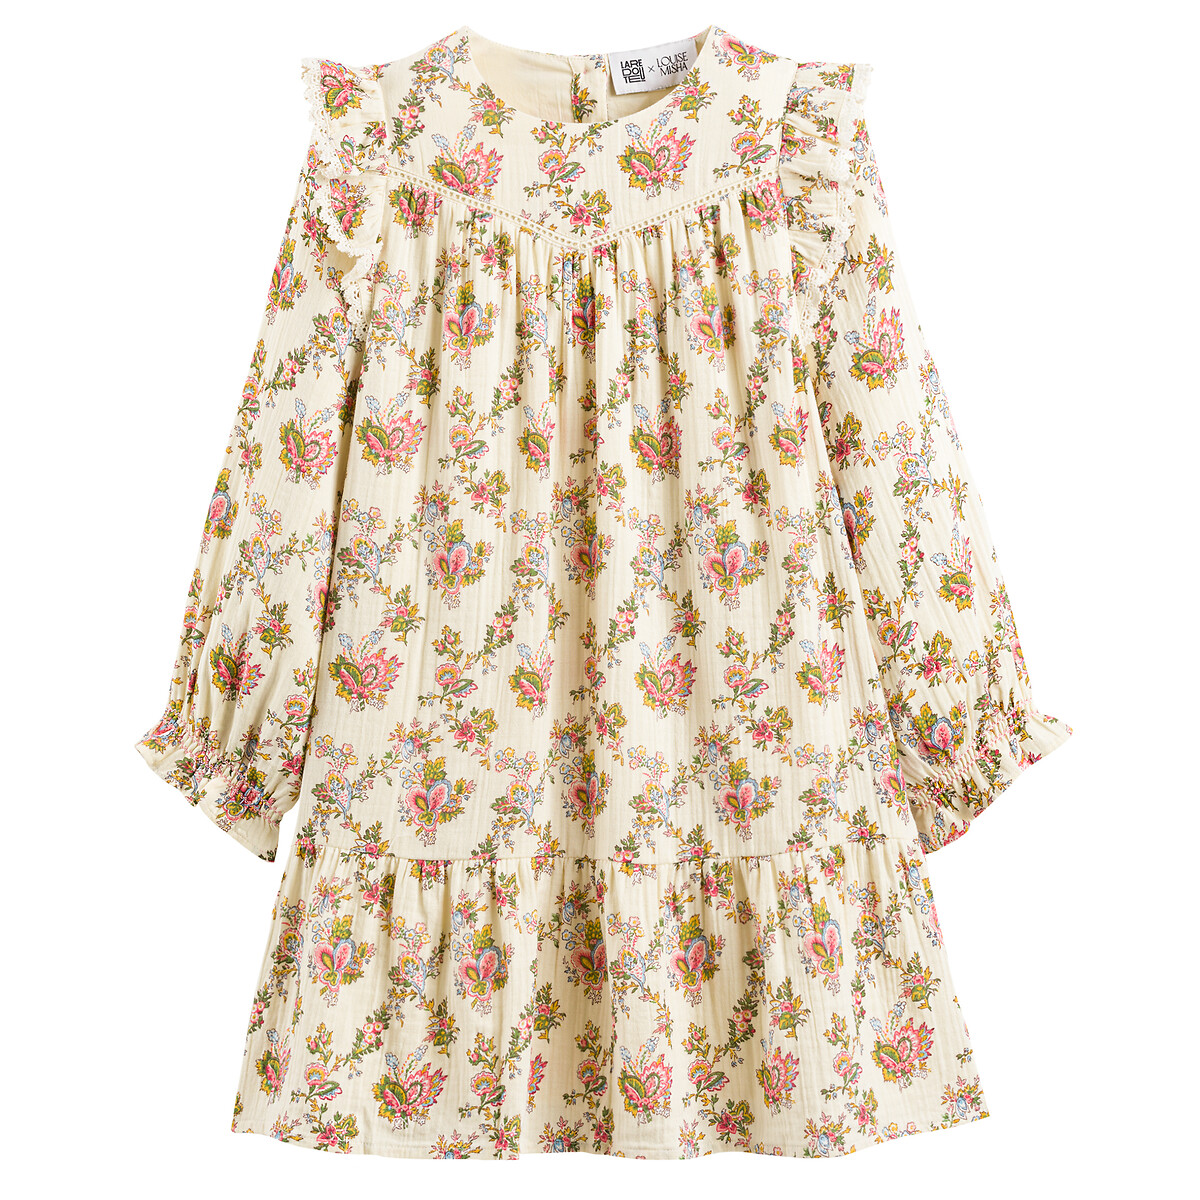 Double Cotton Muslin Dress in Floral Print with Long Sleeves